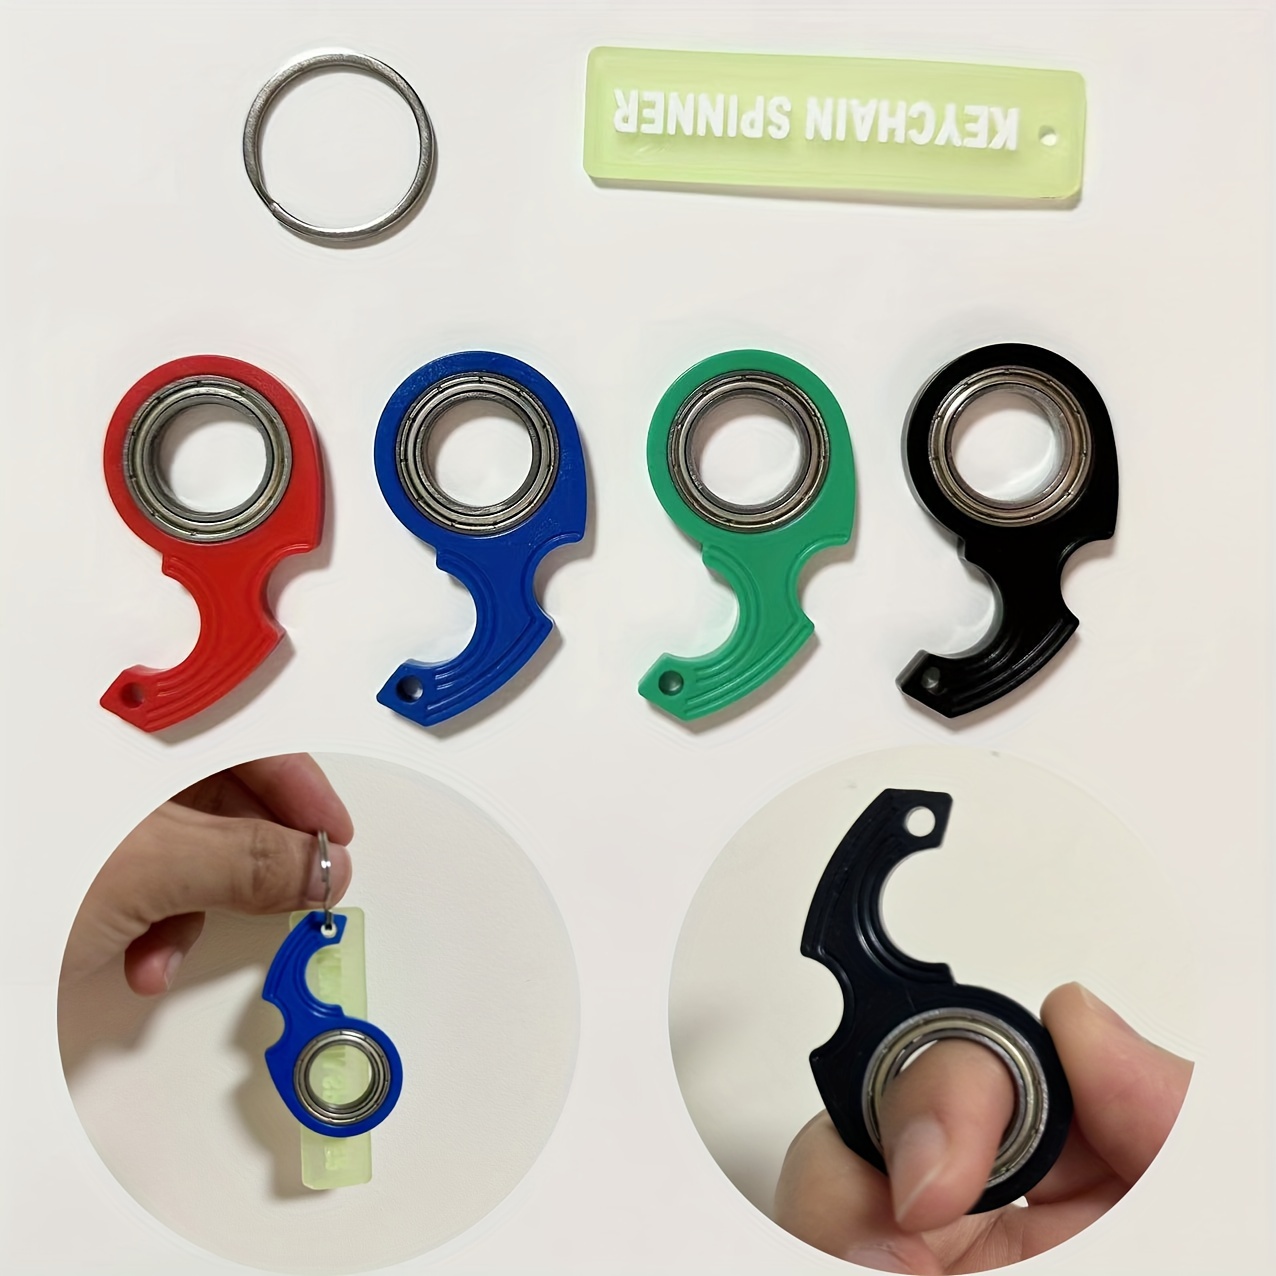 

Multi-colored Glow-in-the-dark Sign Keychain For Men, Black, Green, Red, Blue Spinning Keychain